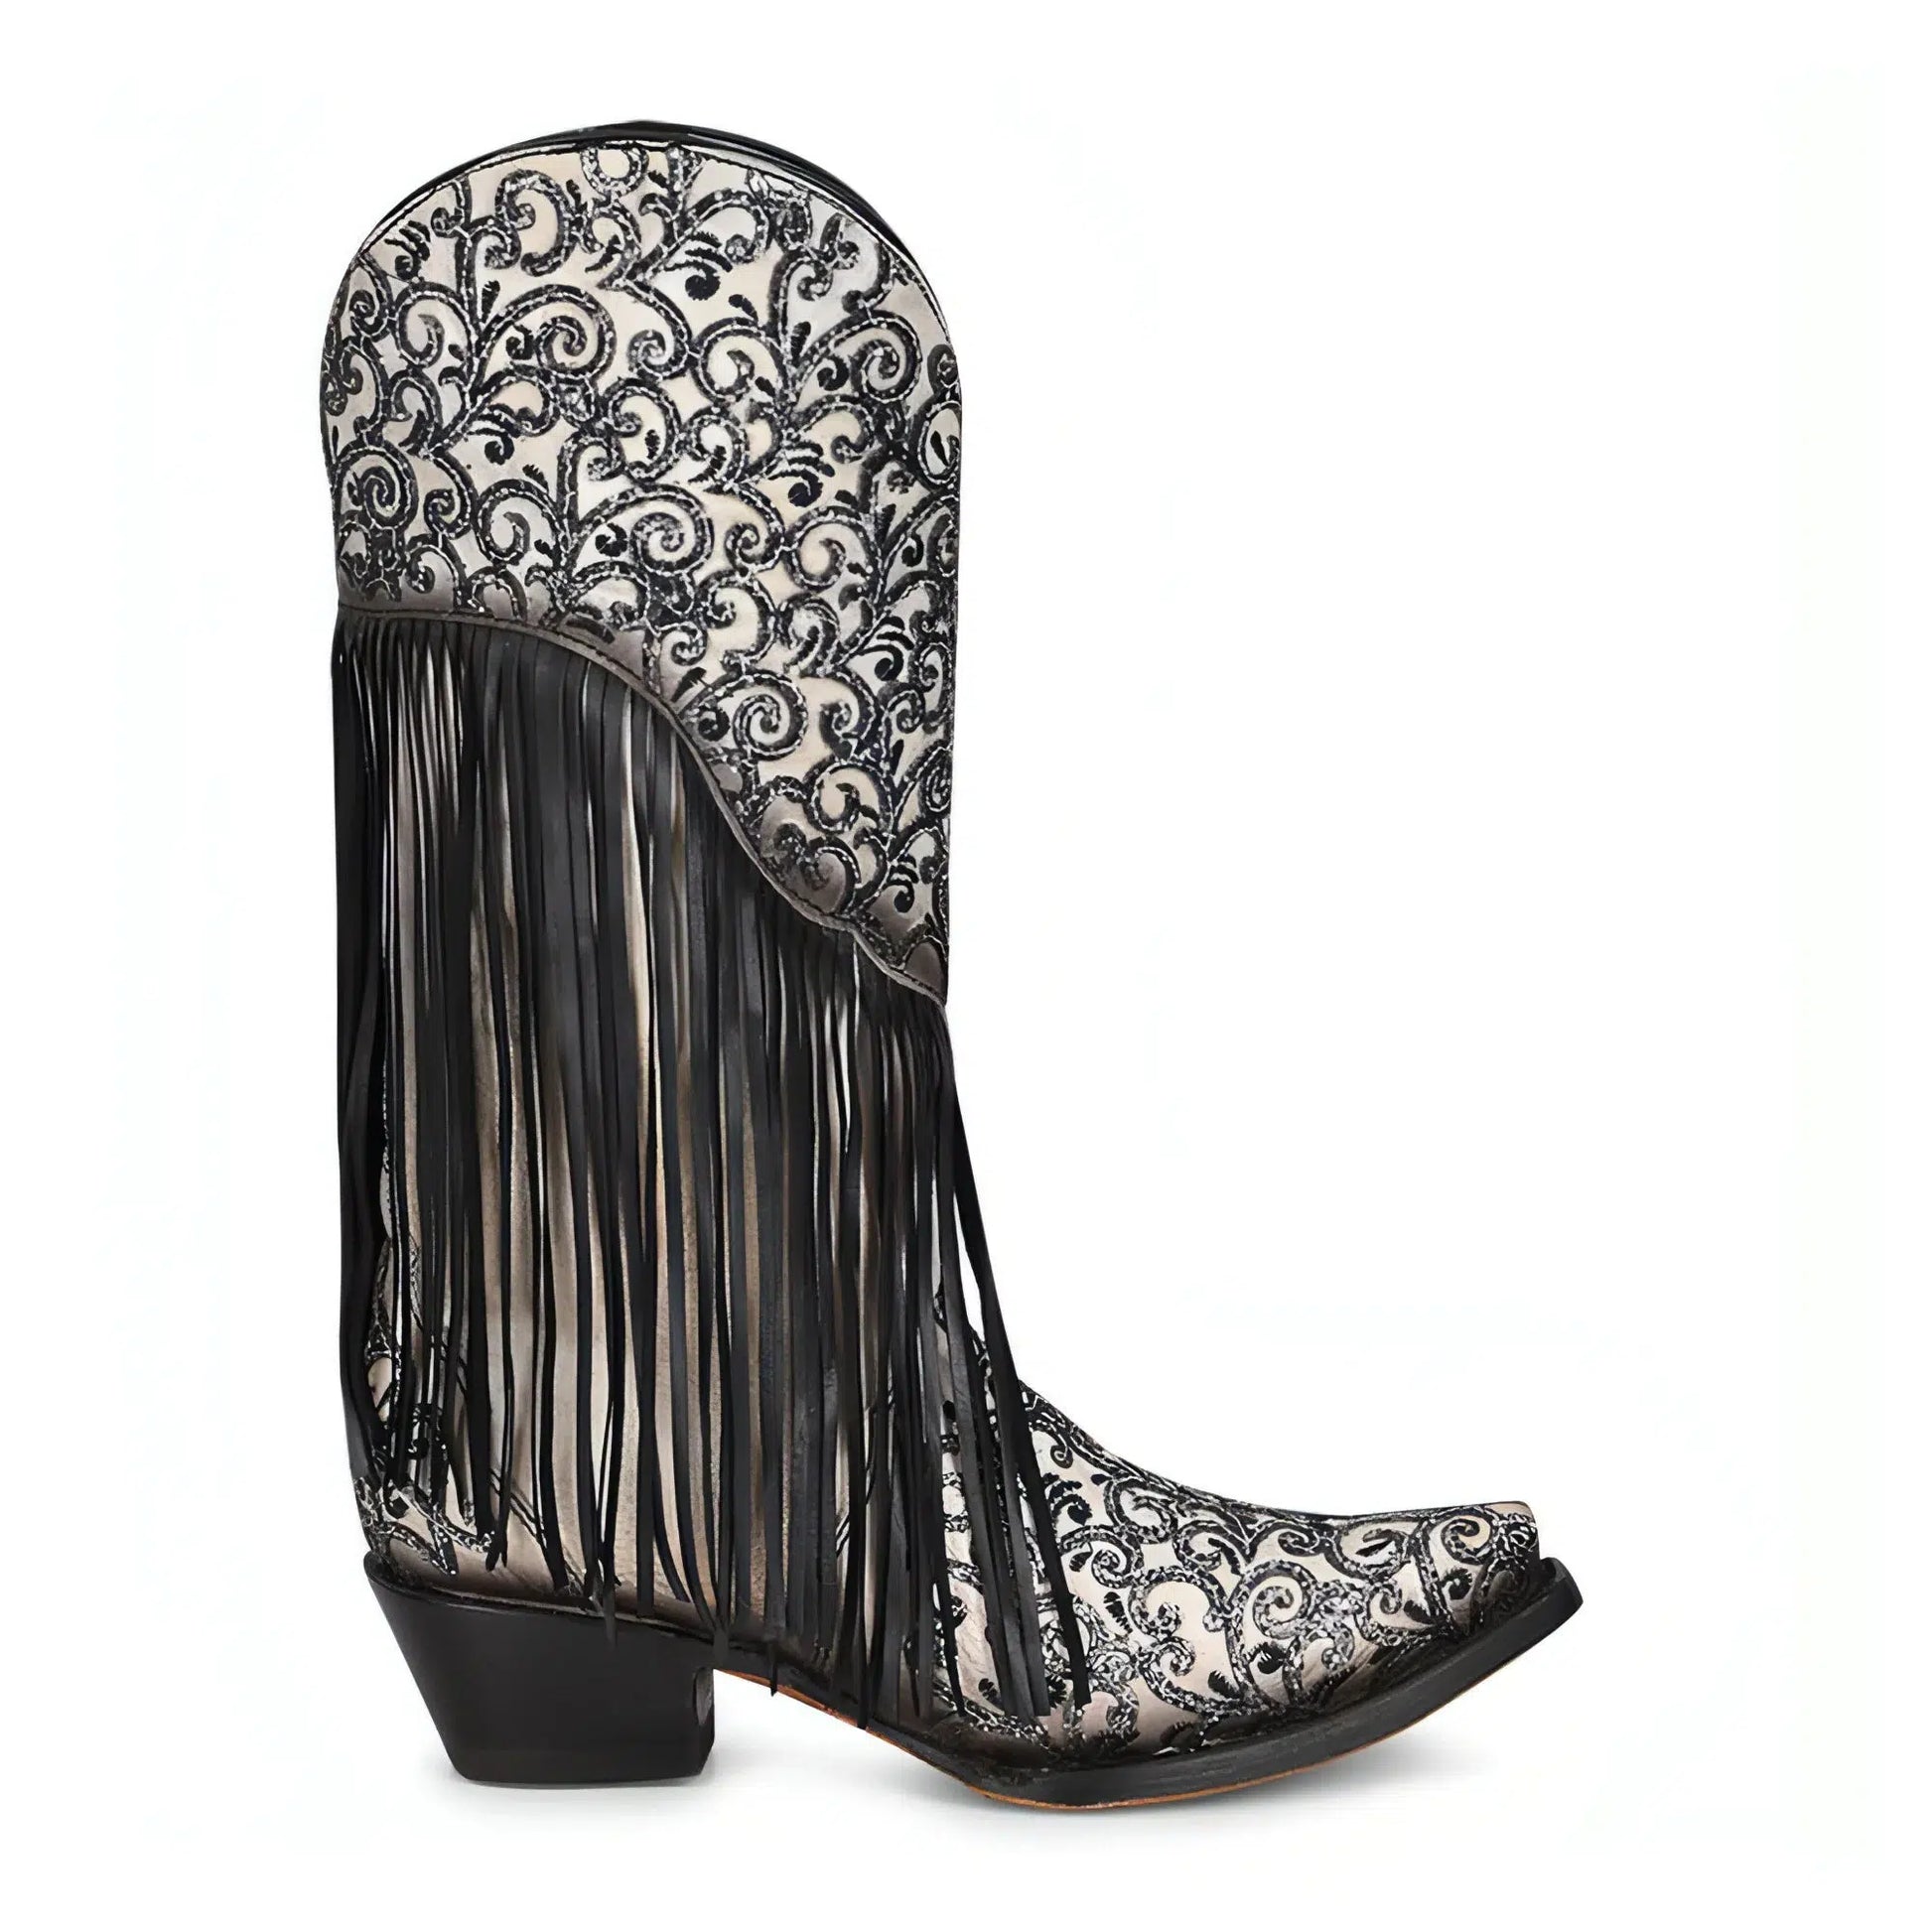 C3877 - M Corral black and white western cowgirl leather fringe boots for women-Kuet.us